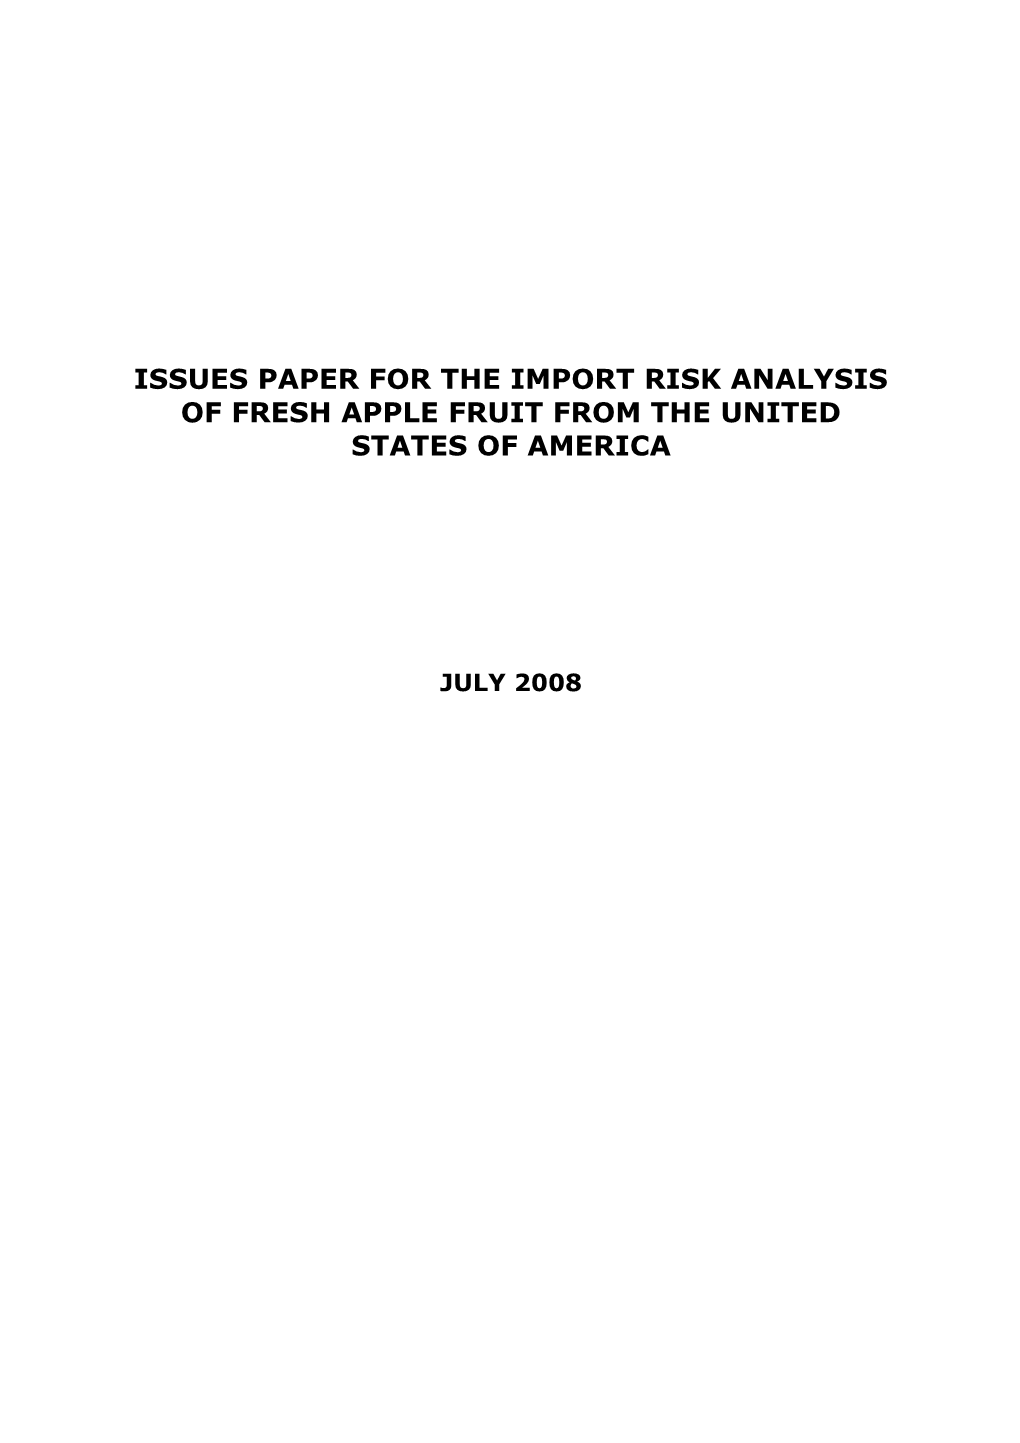 Issues Paper for the Import Risk Analysis of Fresh Apple Fruit from the United States of America